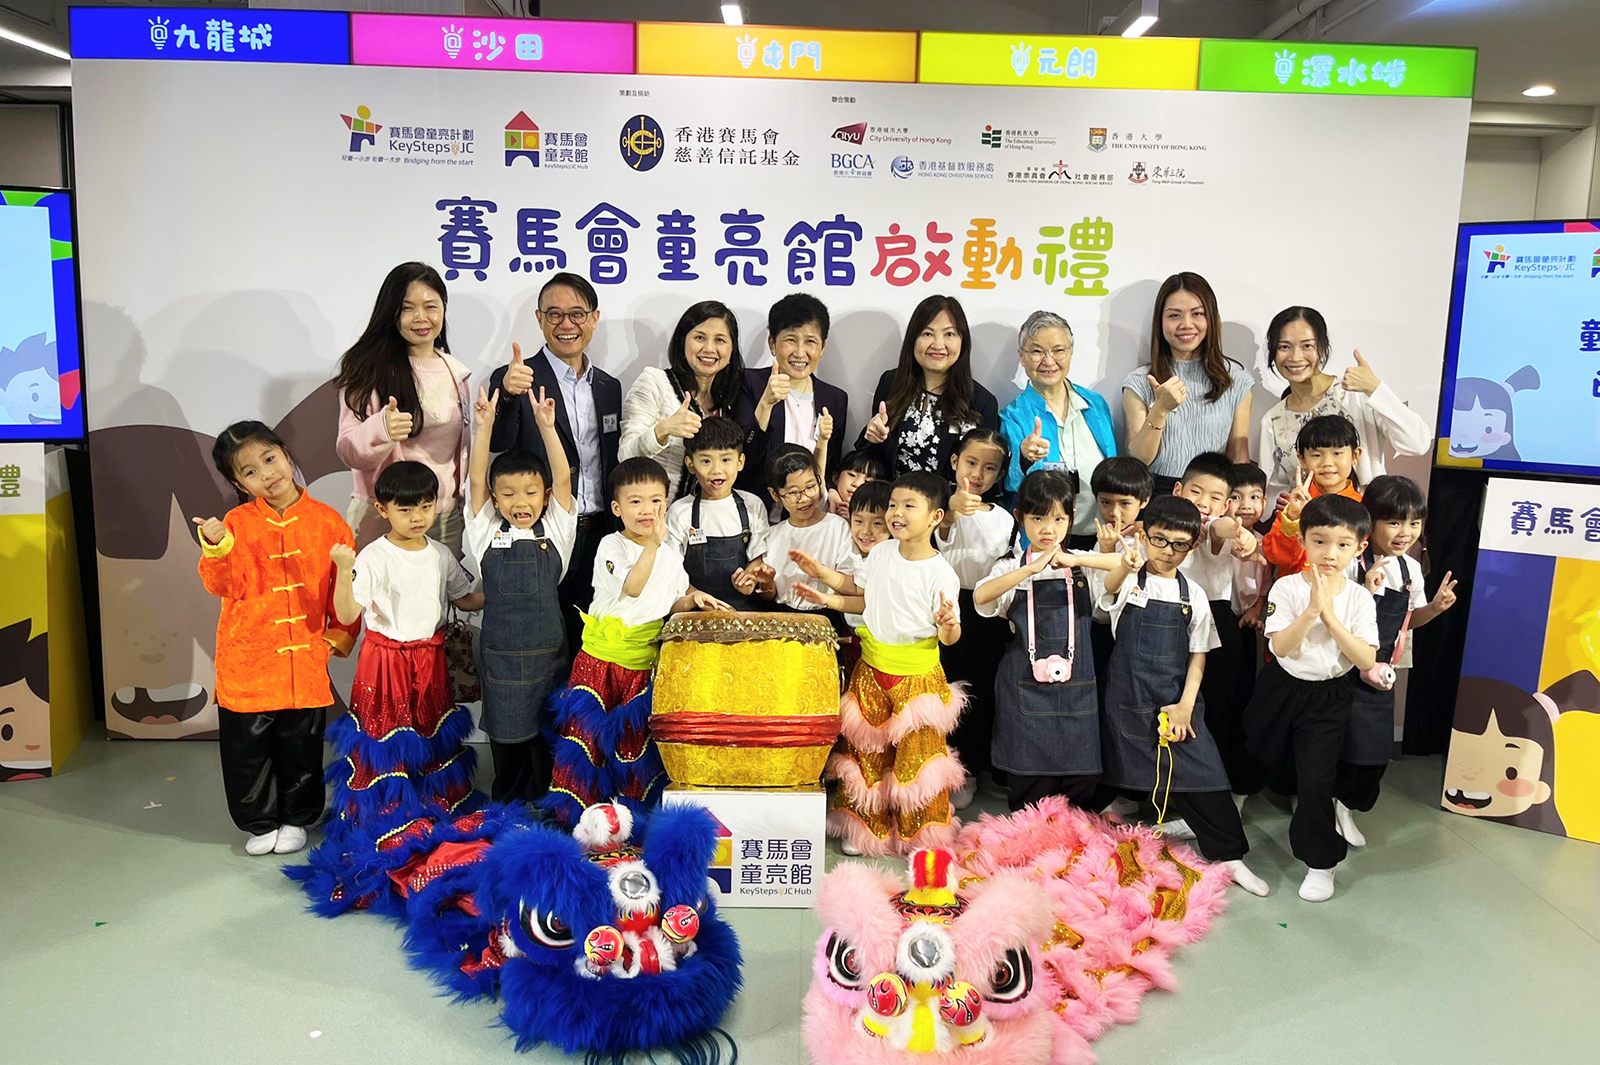 Professor Hui (fourth from left, back row) celebrates the official opening of five KeySteps@JC Hubs with a group of children.